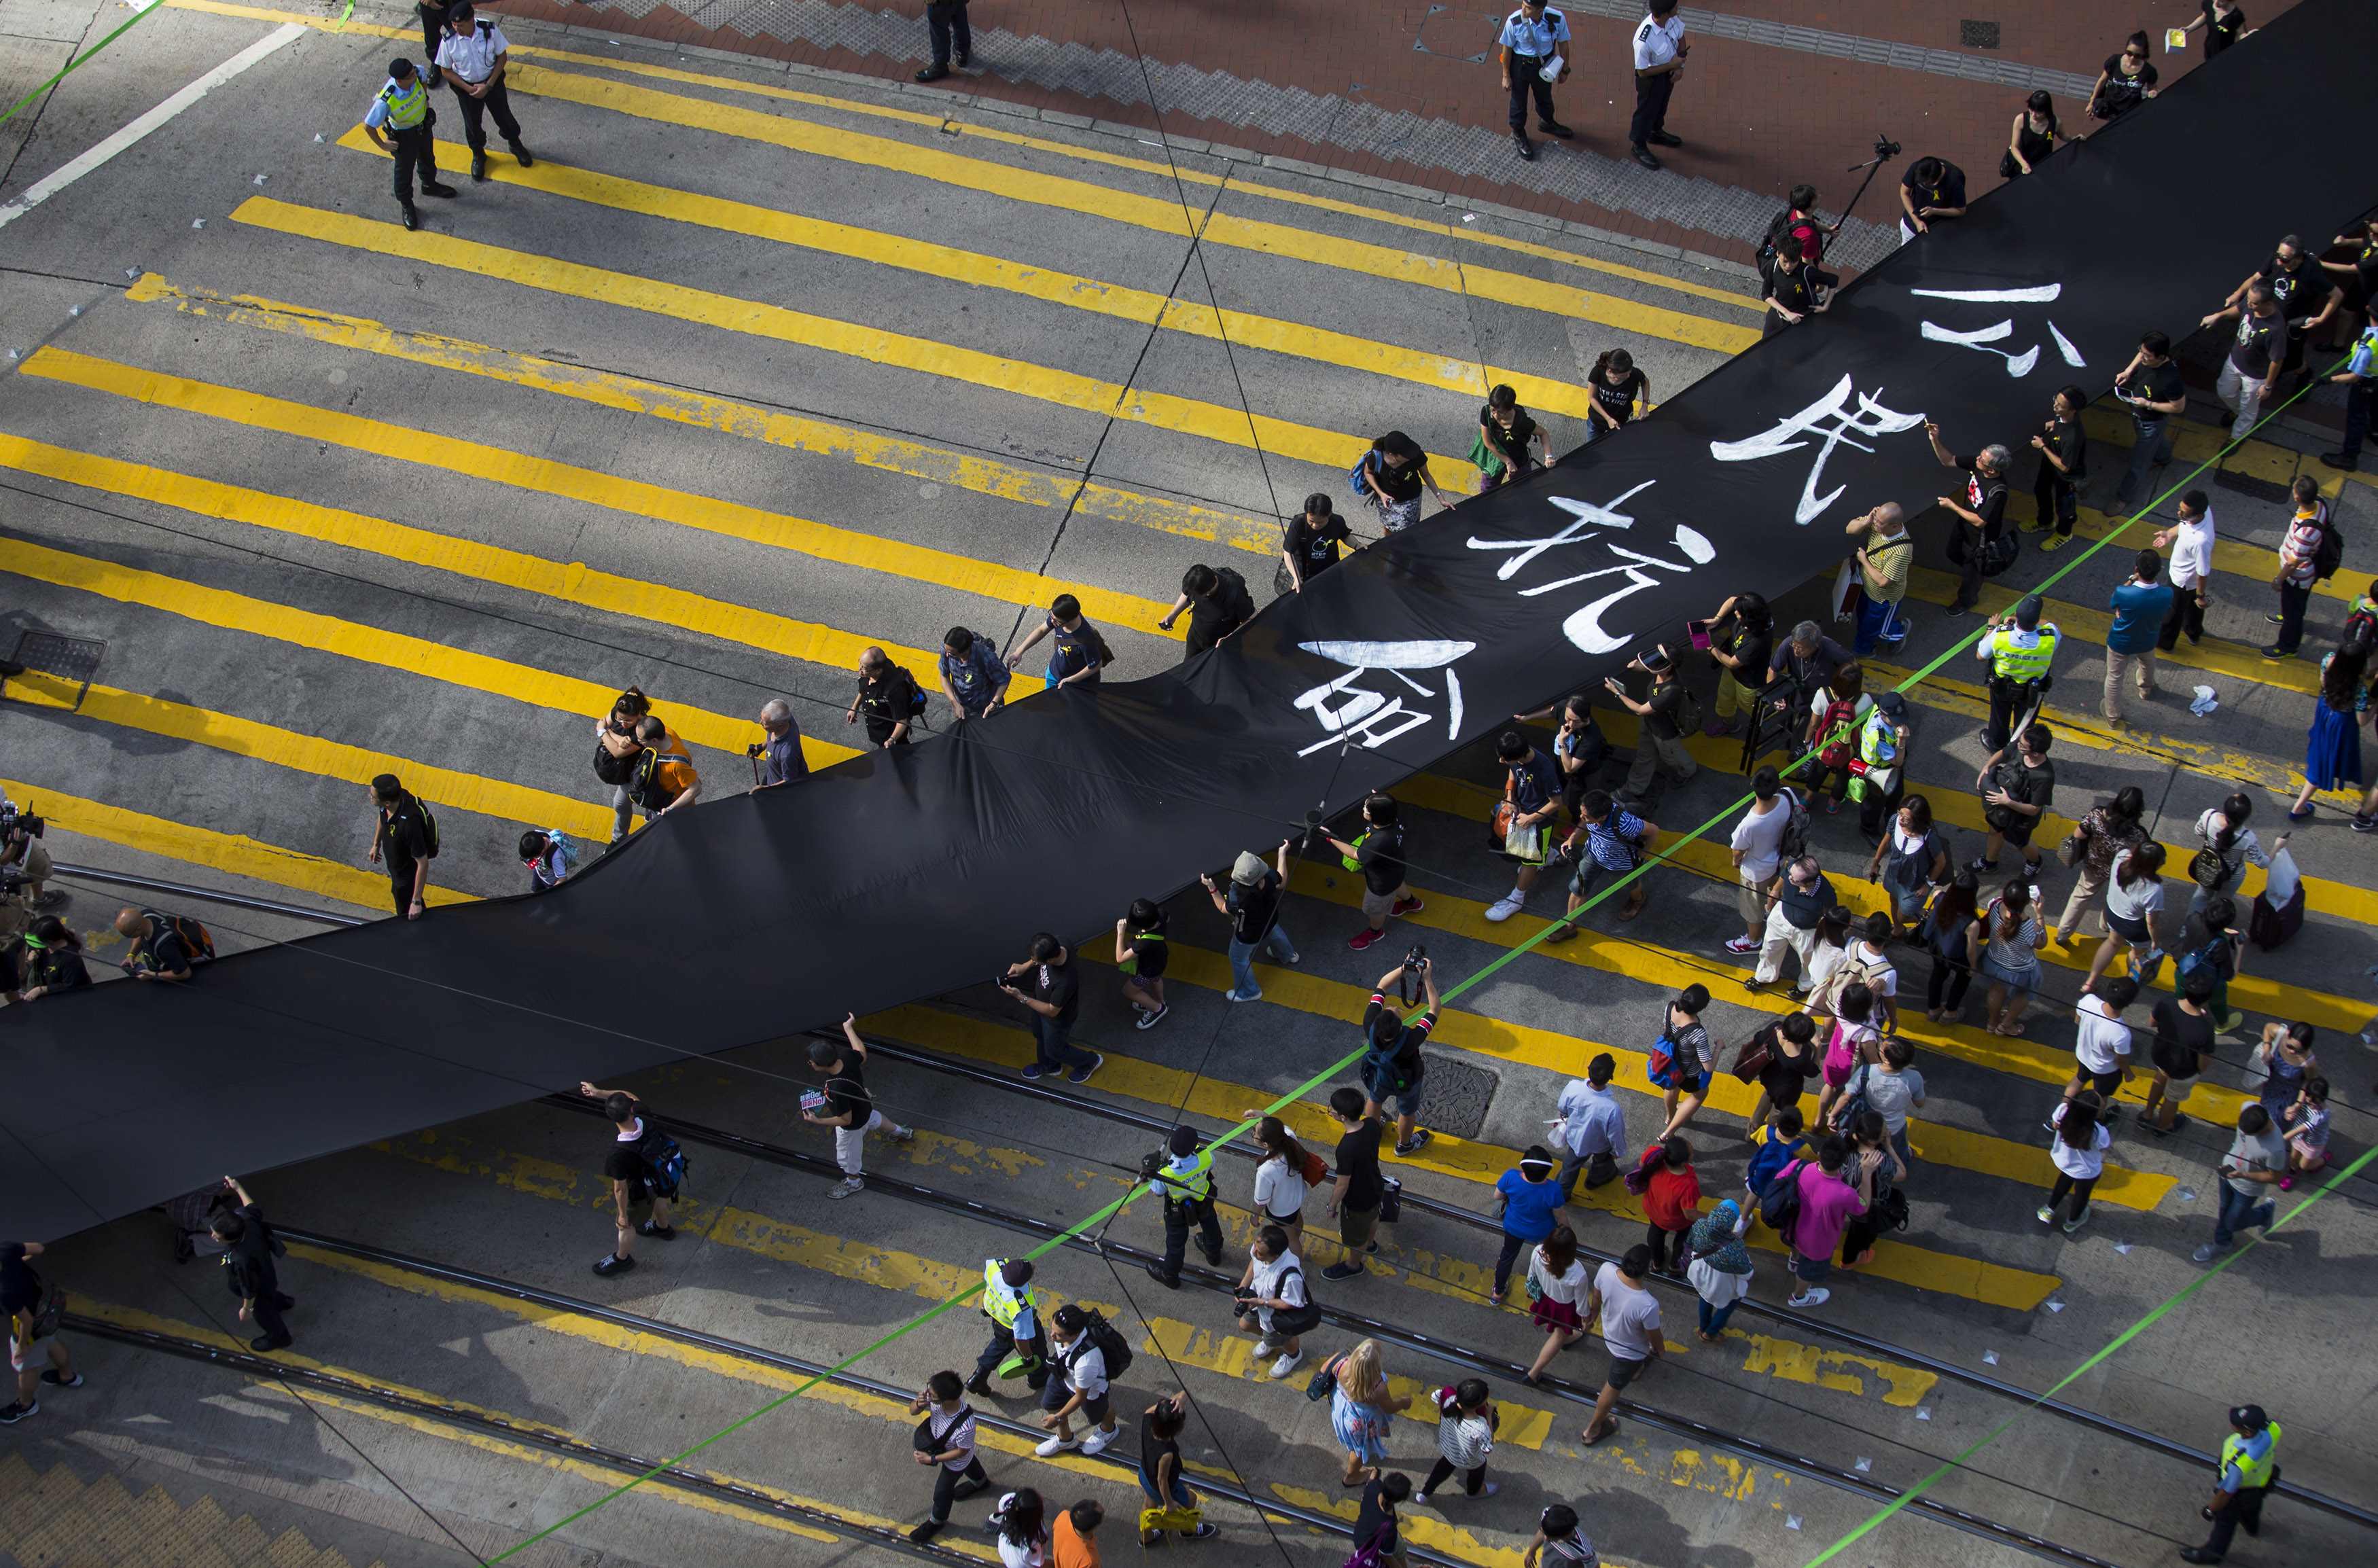 Occupy Central protesters marching this month, ahead of a planned blockade of streets in Central. Photo: Reuters